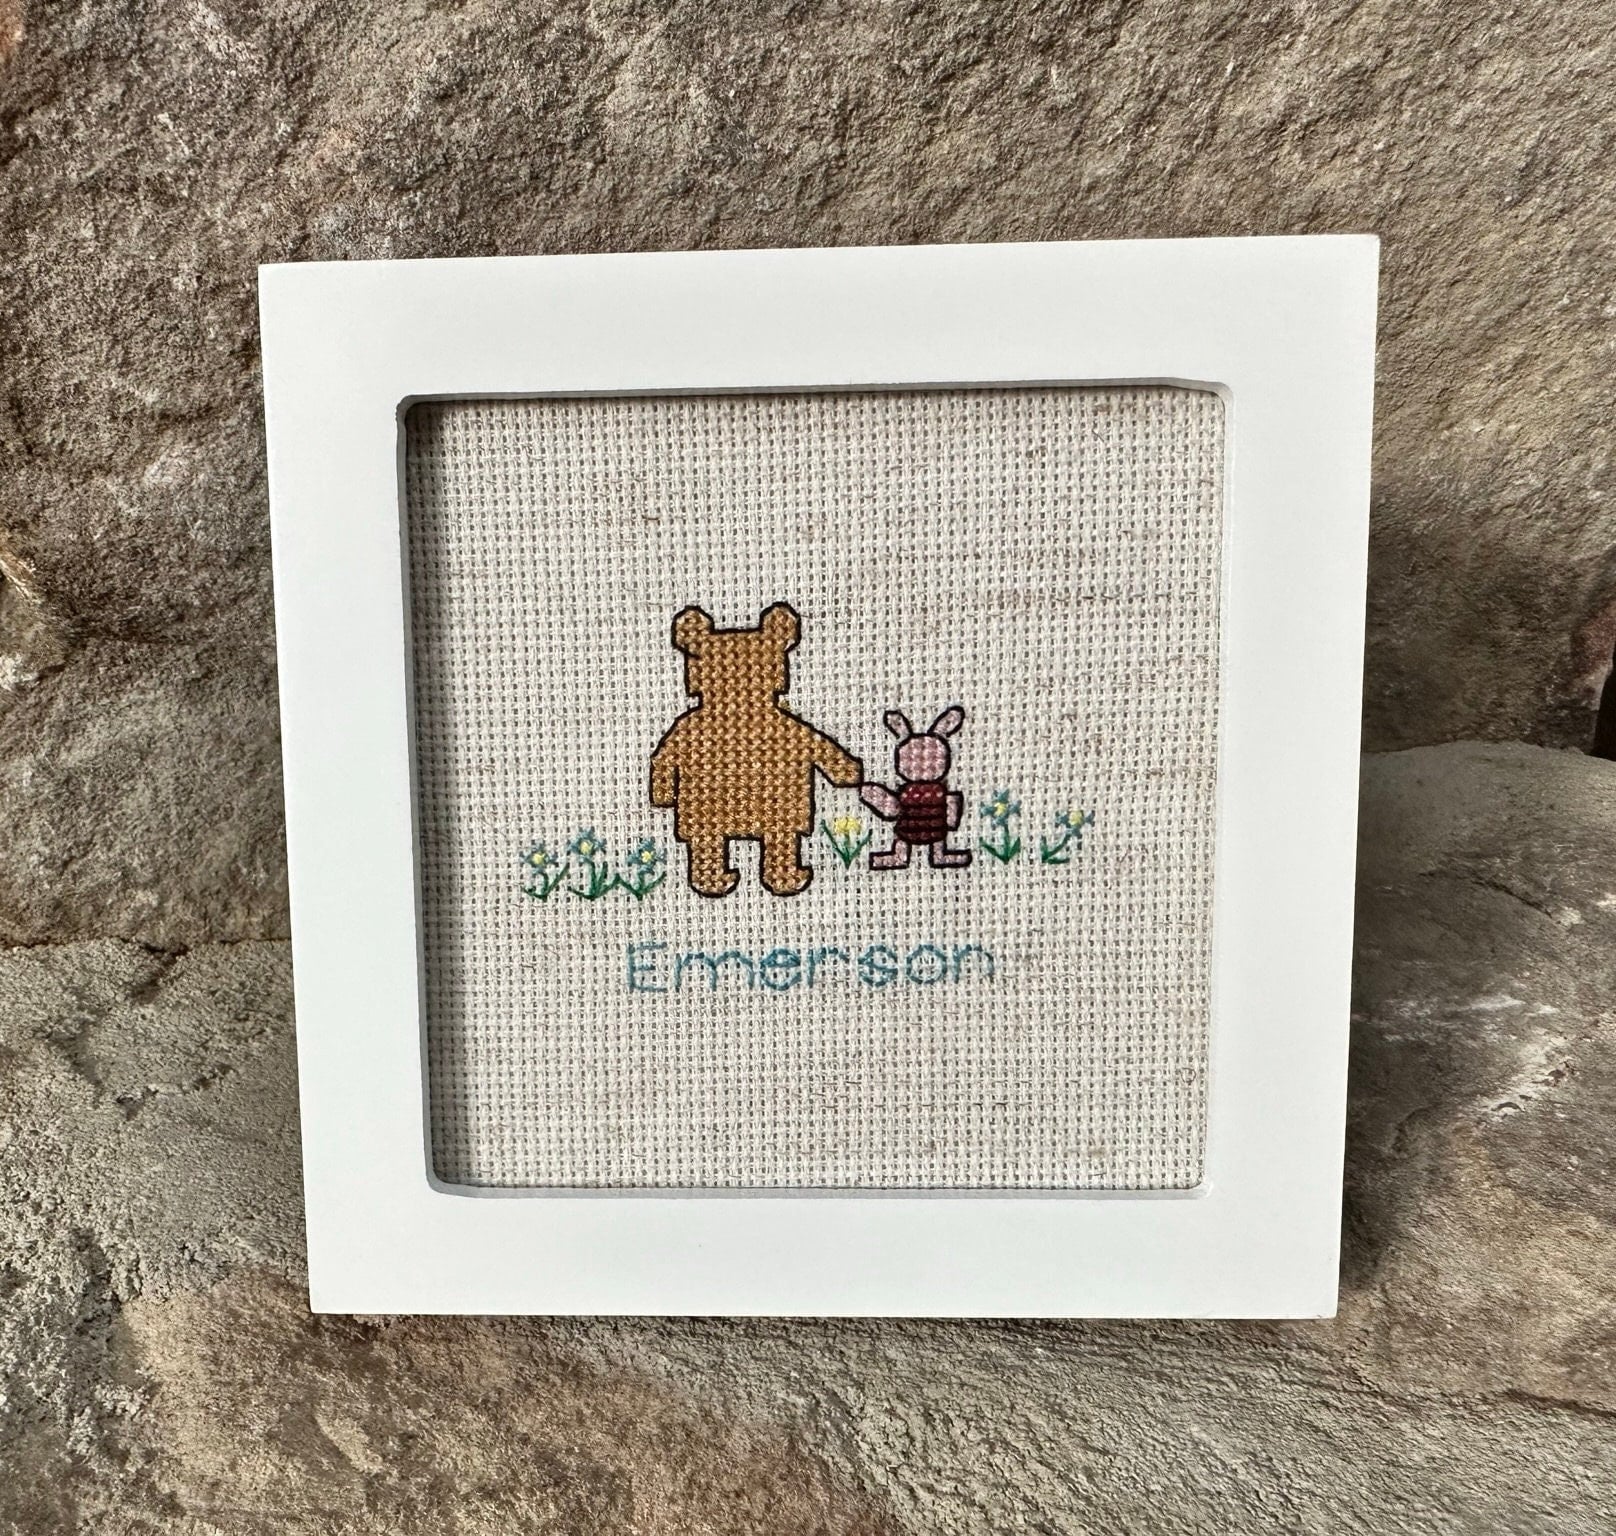 Winnie The Pooh Birth Record (14 Count) Disney Counted Cross Stitch Kit 8x10 - Dimensions